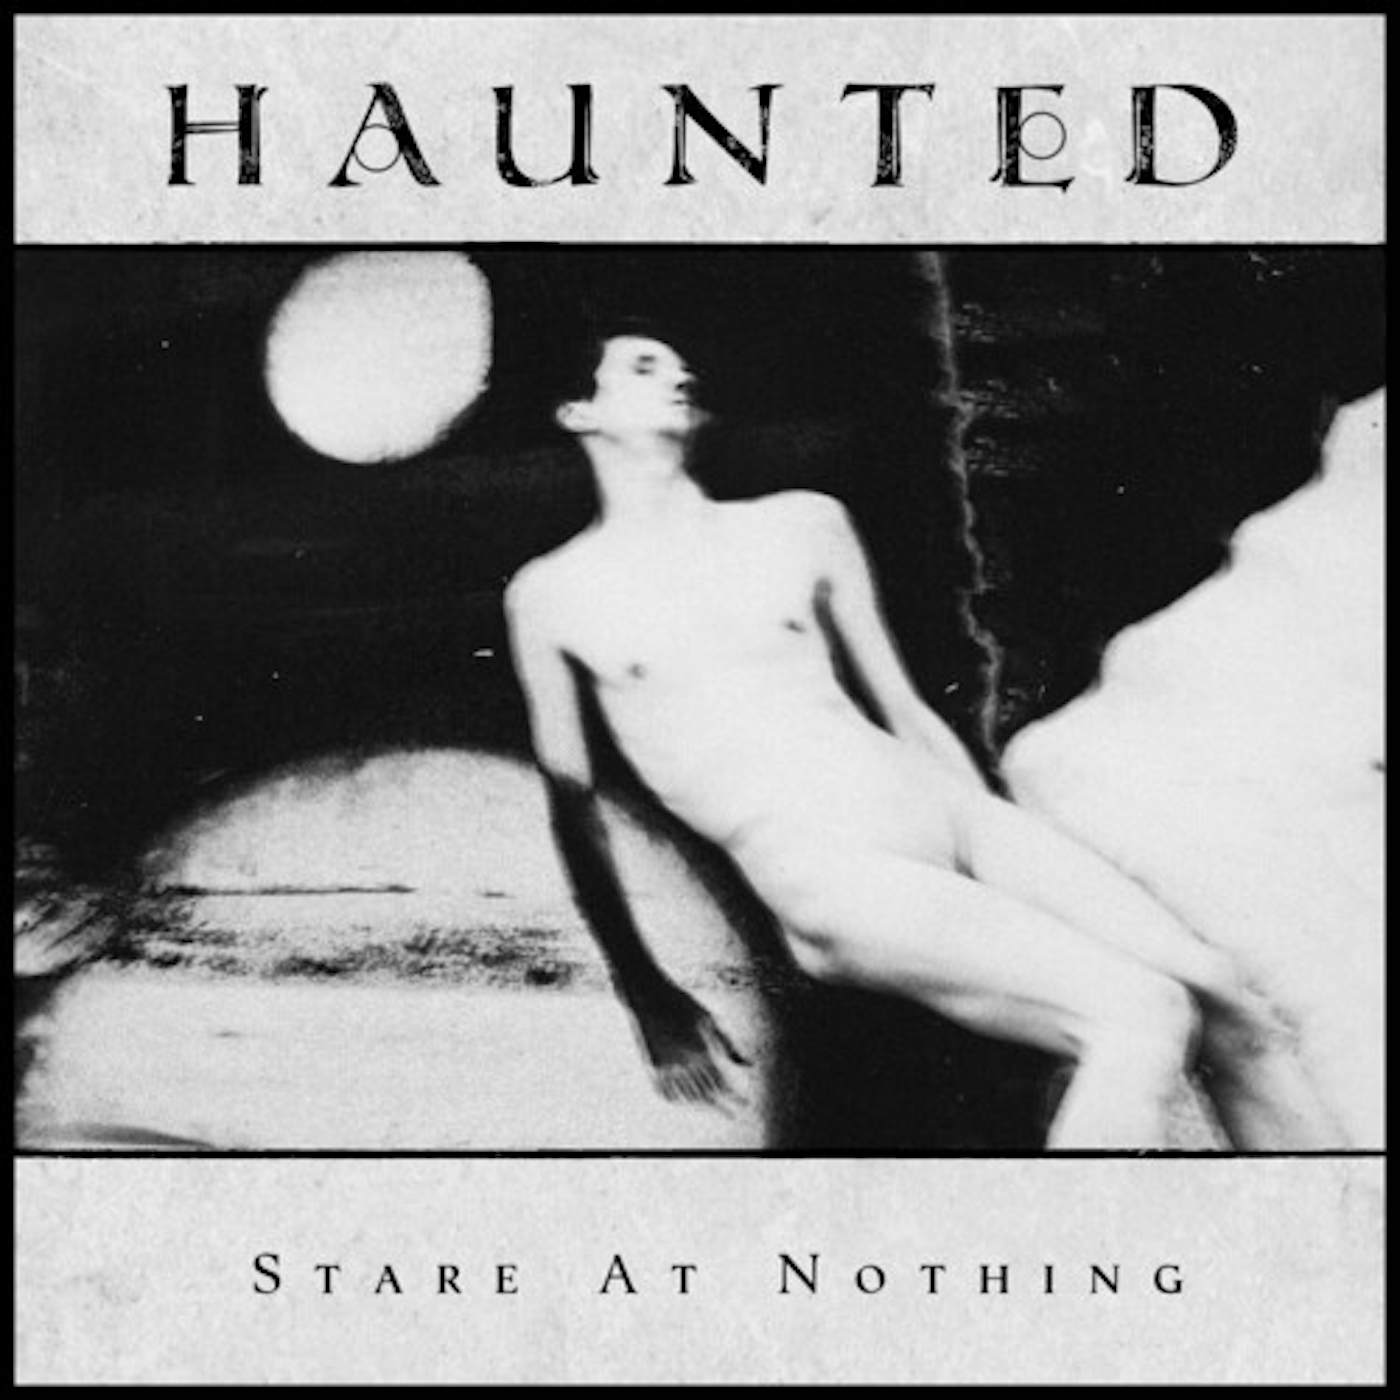 Haunted STARE AT NOTHING Vinyl Record